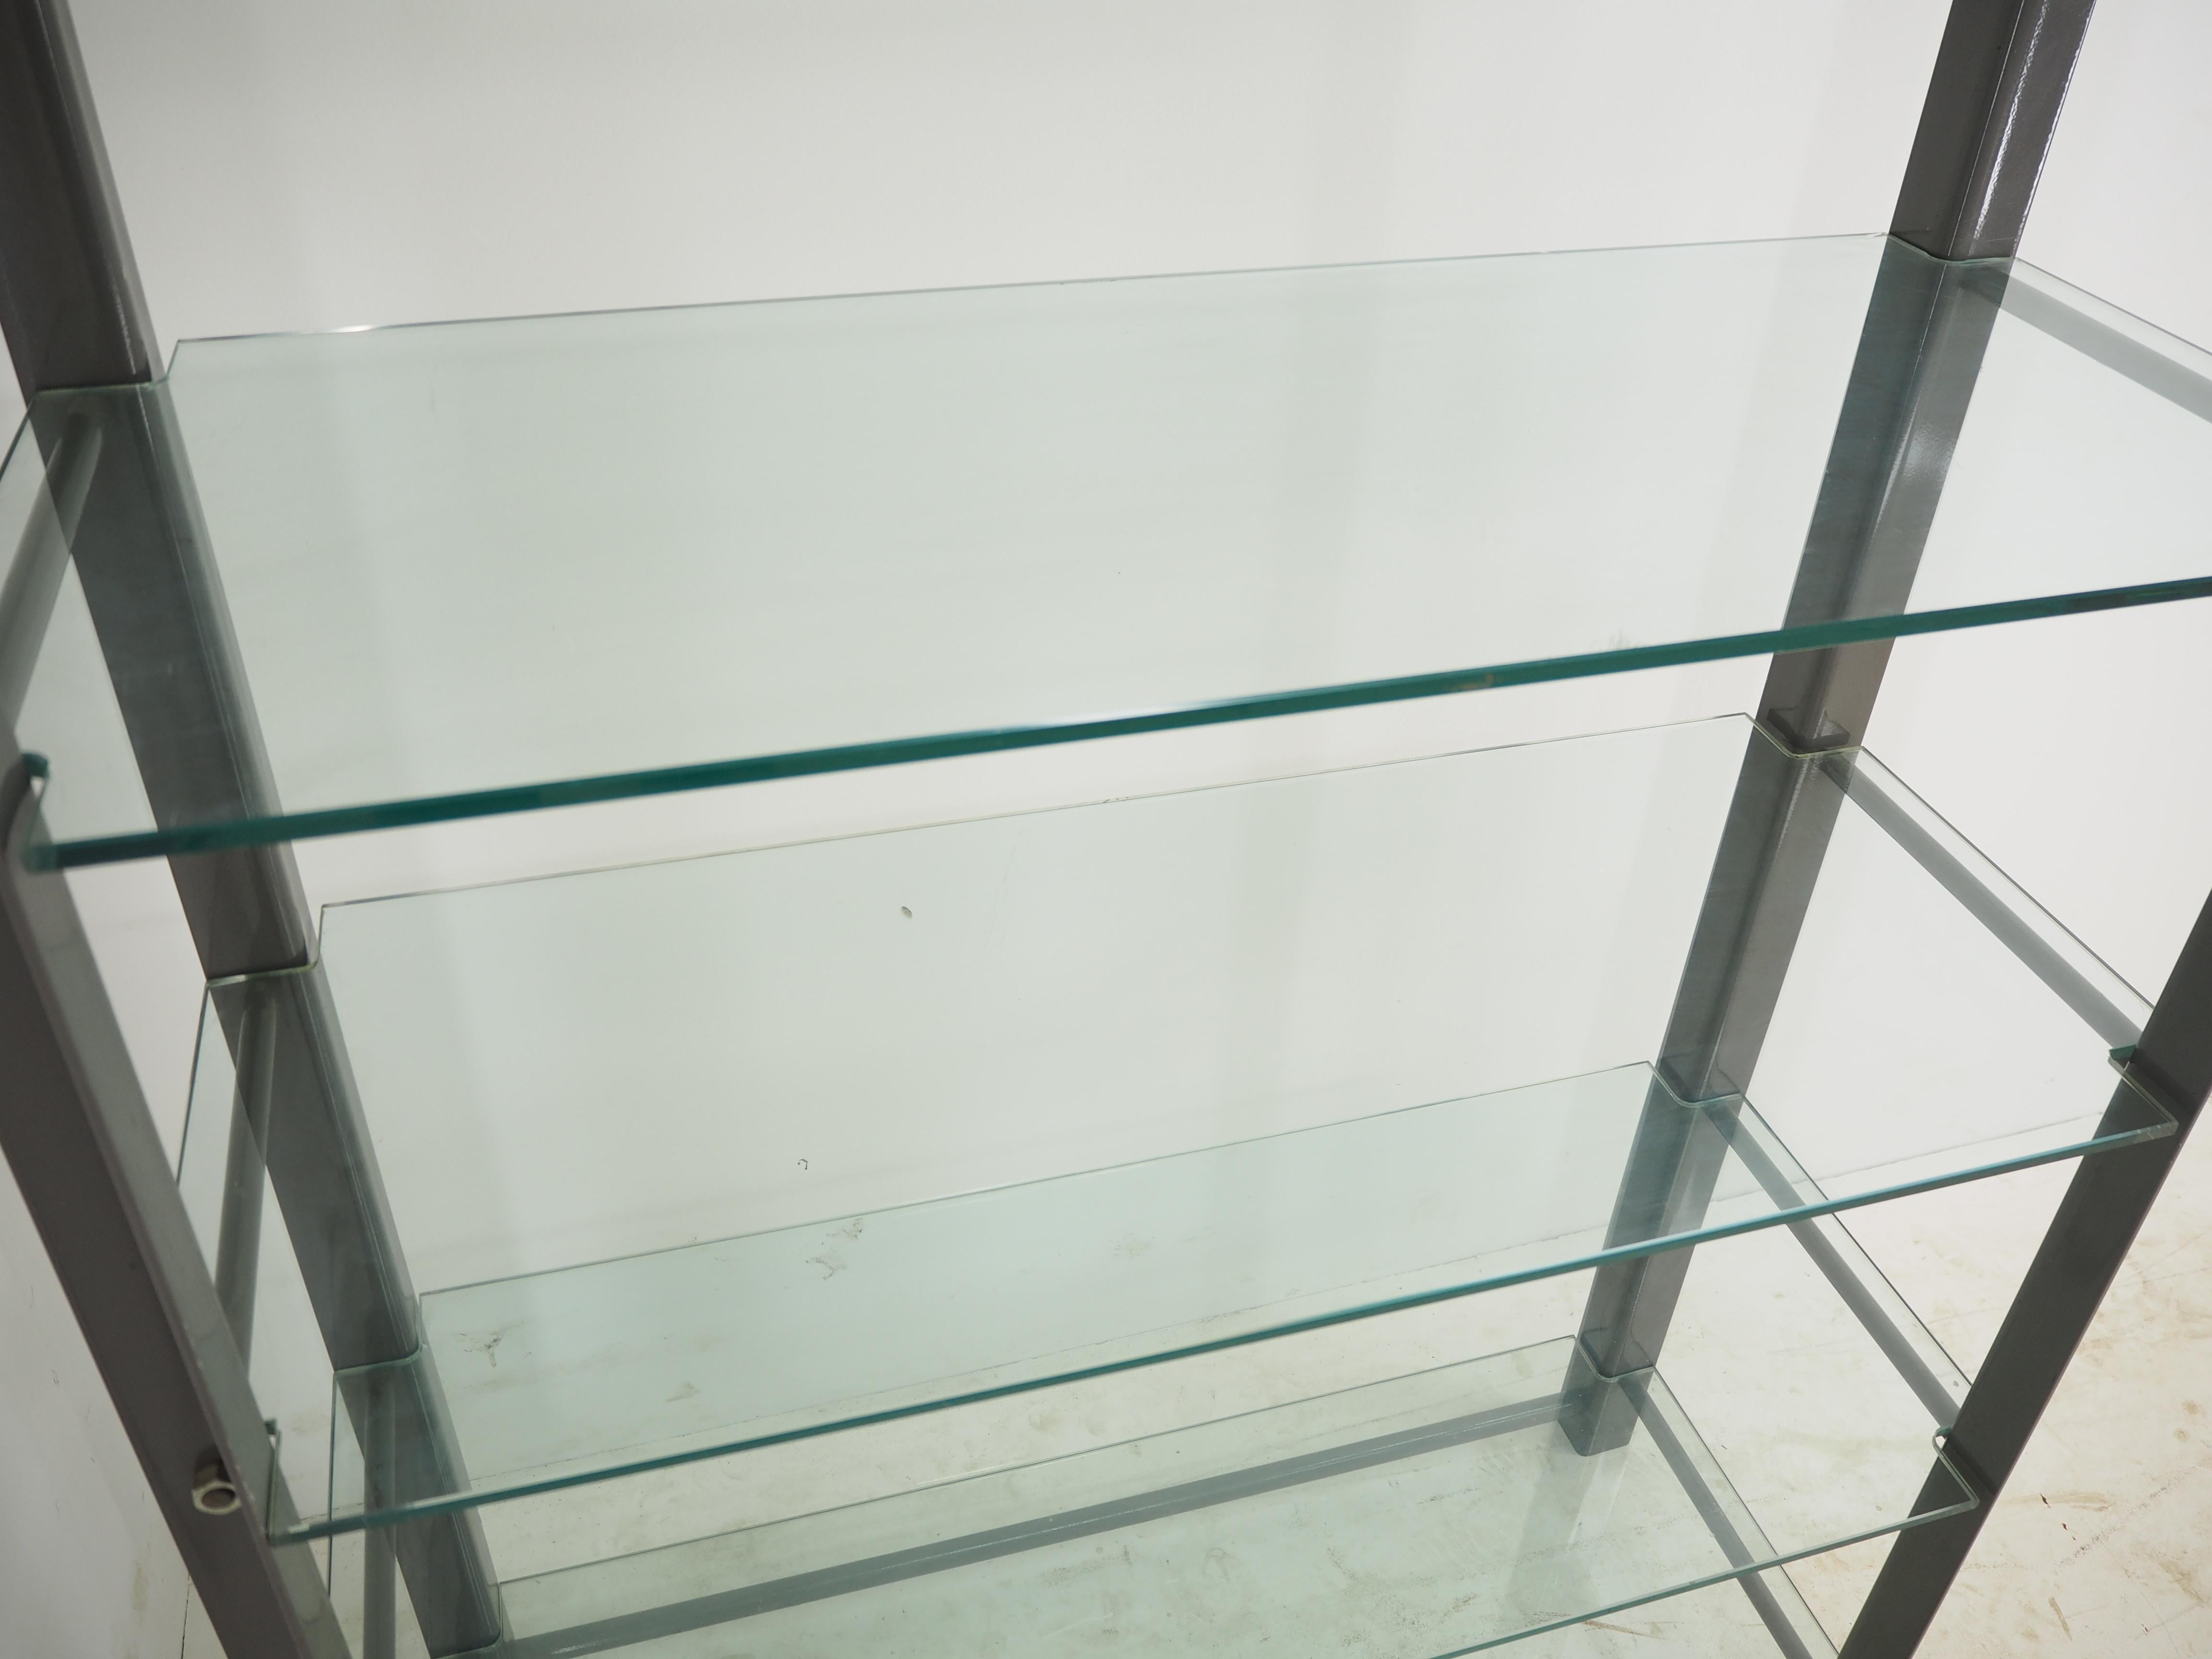 Industrial Shelves, Steel and Tempered Glass, 2000s For Sale 2